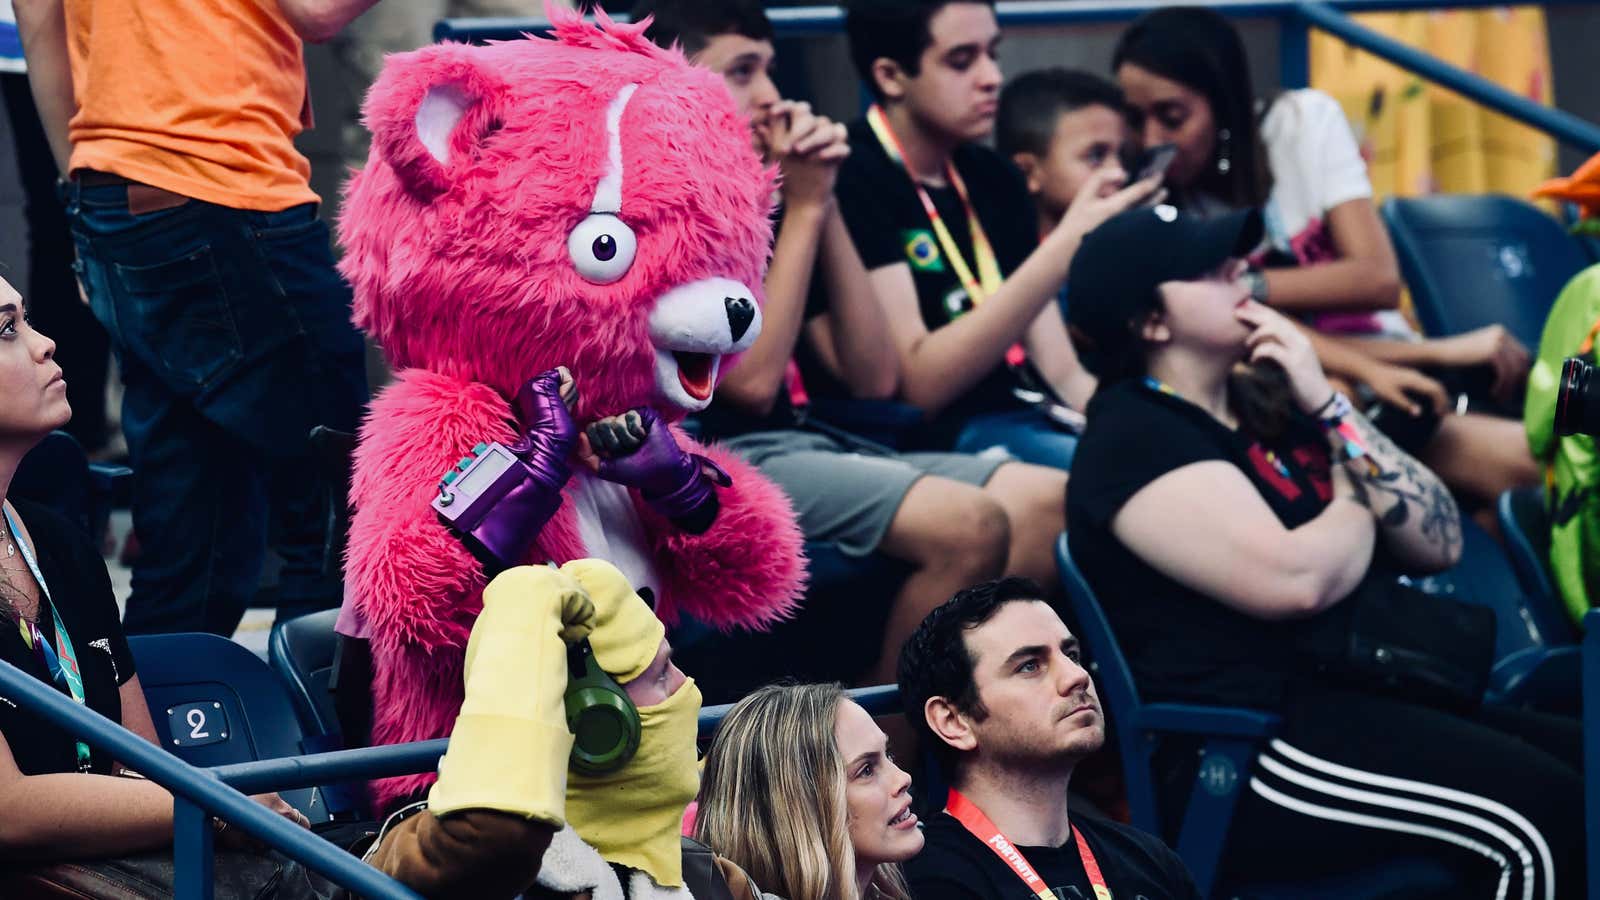 Fortnite characters and fans at the World Cup Finals esports event at Arthur Ashe Stadium in New York.